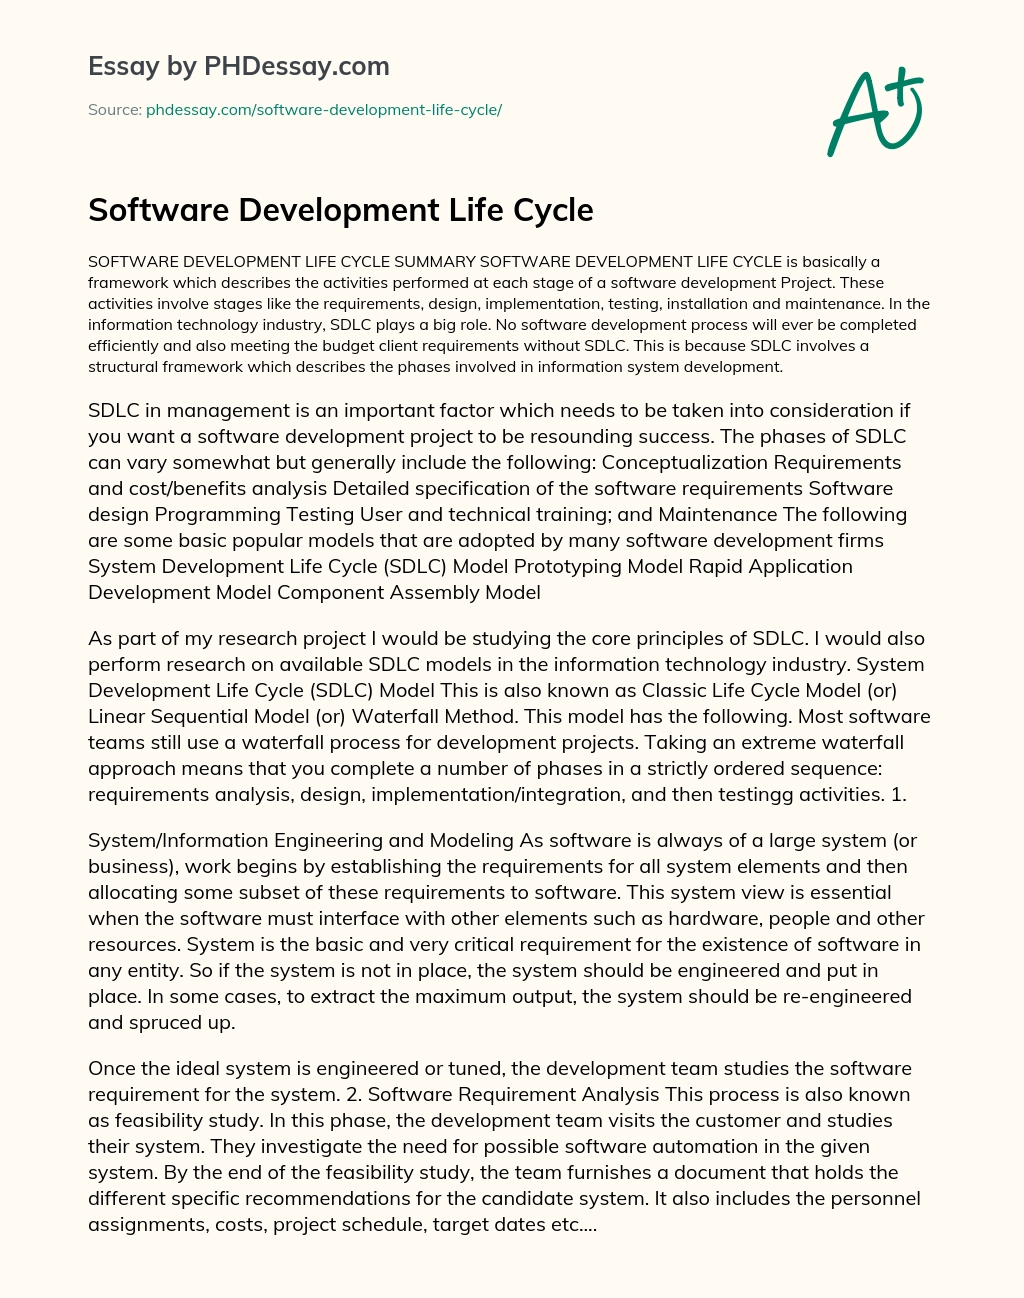 Software Development Life Cycle essay